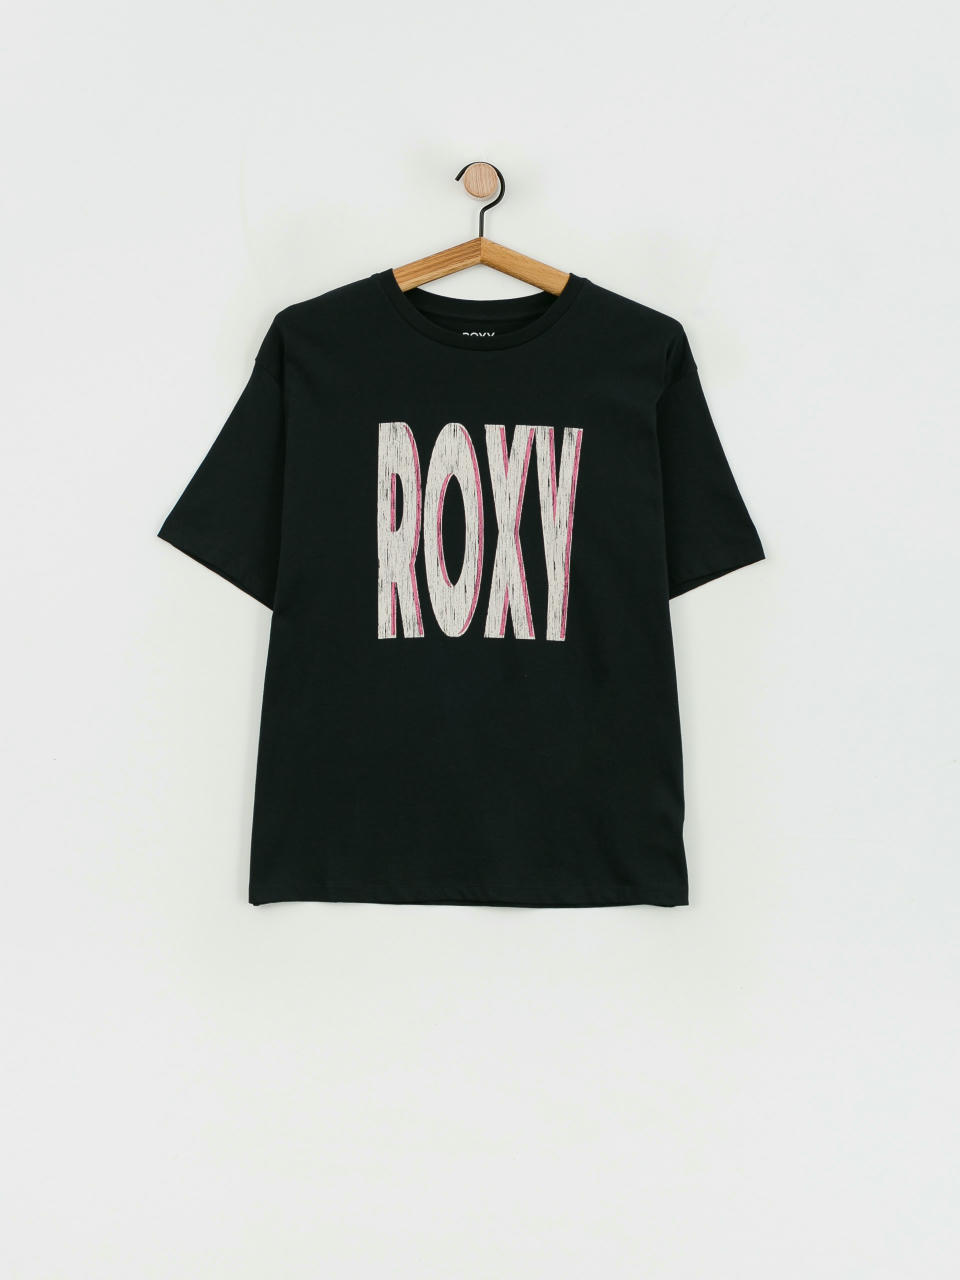 Roxy Sand Wmn Sky T-shirt (anthracite) Under The